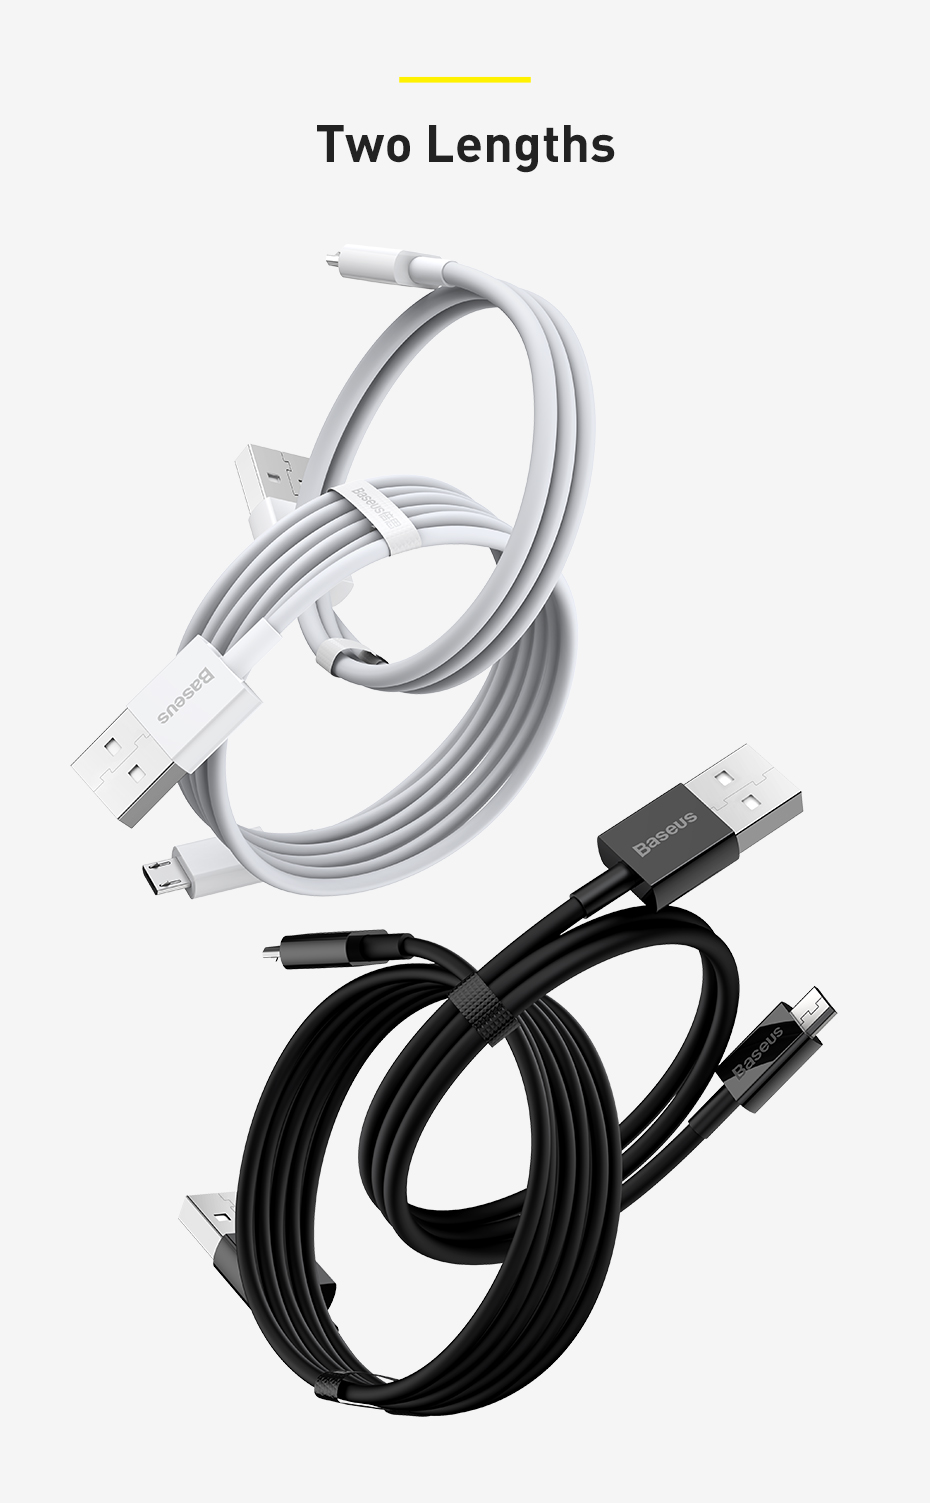 Baseus-2A-Sperior-Series-Micro-USB-Fast-Charging-Data-Cable-for-Mobile-Phone-Power-Bank-Tablet-Deskt-1857042-10